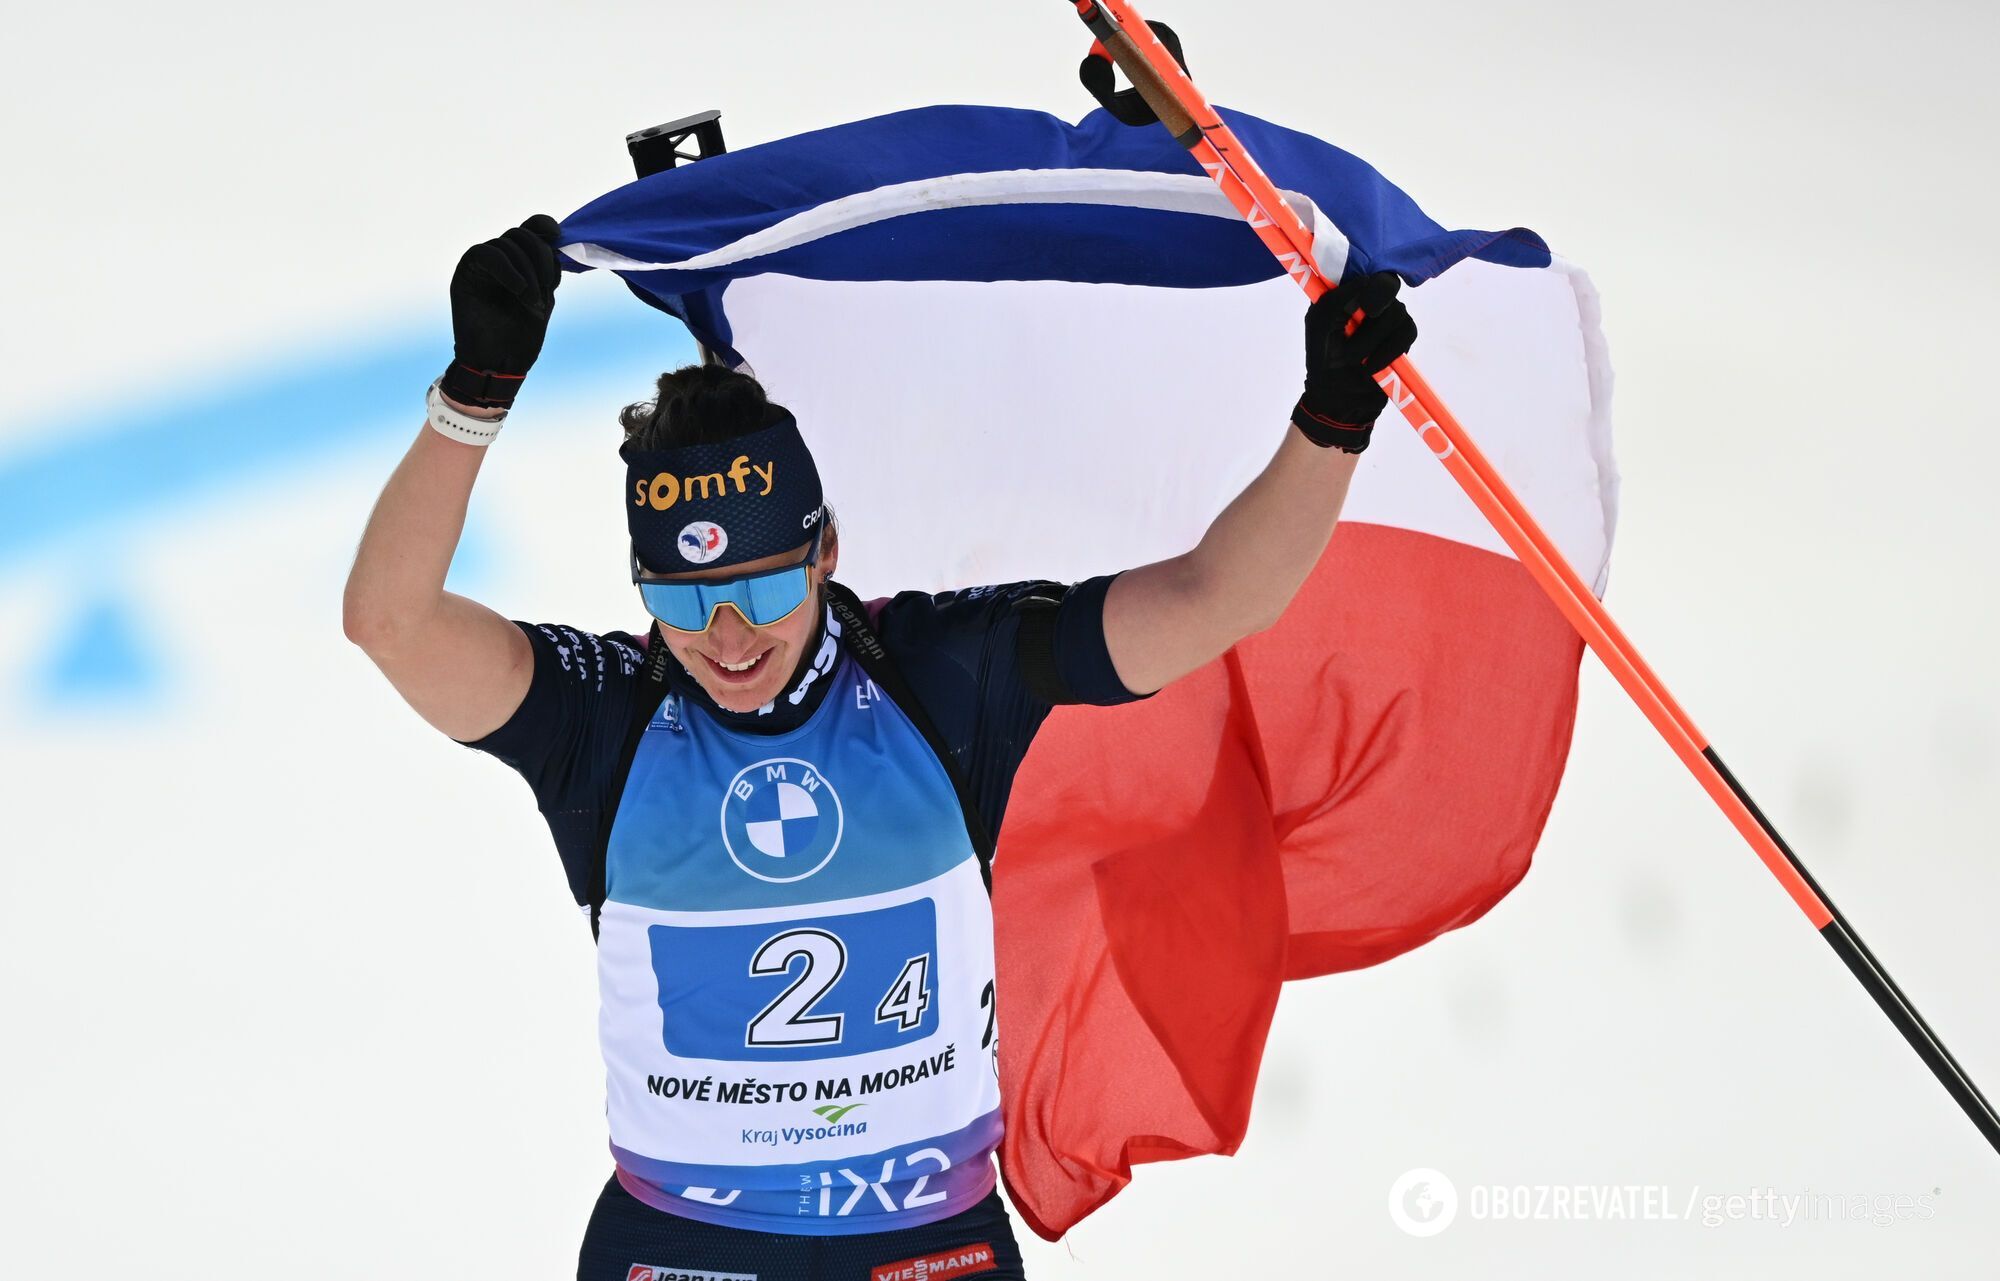 It's never been done before. The Biathlon World Championships race has gone down in history. Video